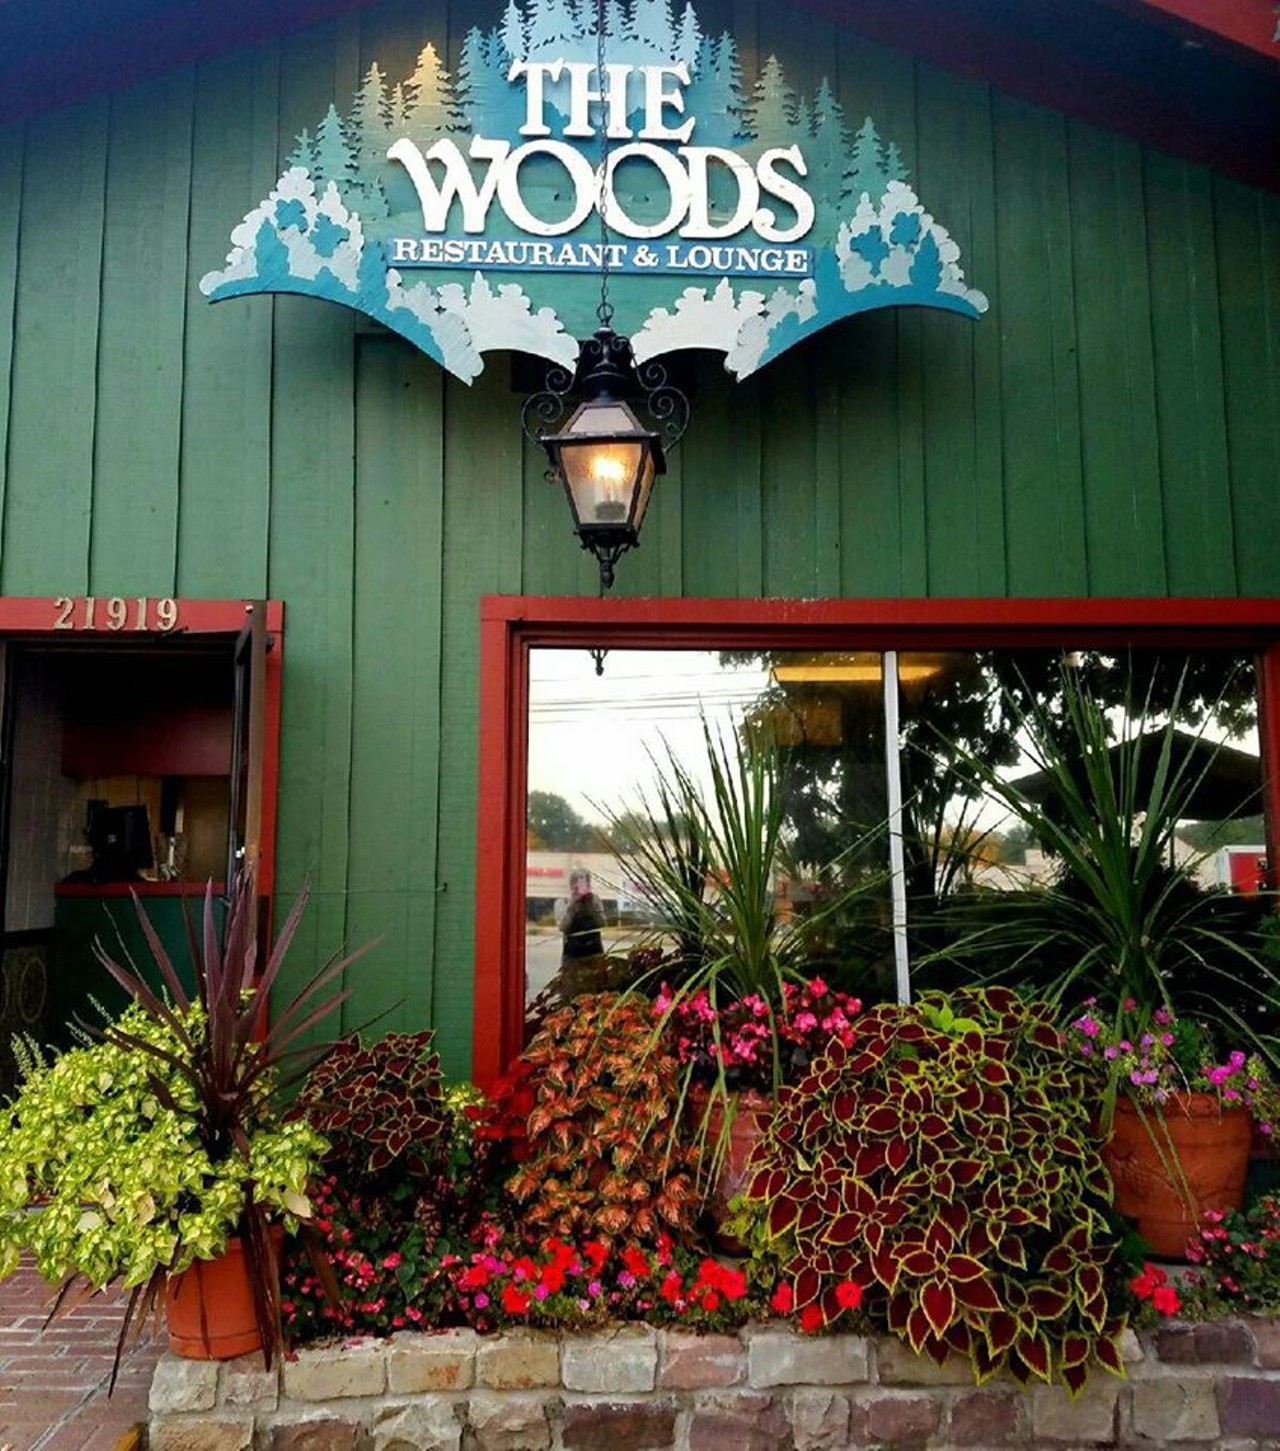  The Woods
21919 Center Ridge Rd., Rocky River
These family style dinners for four include your choice of spaghetti and meatballs for $45, lasagna (meat or veggie) for $55 or chicken parmigana and fettuccine marinara for $65. All meals come with salad and bread and garlic butter.
Photo via The Woods/Facebook